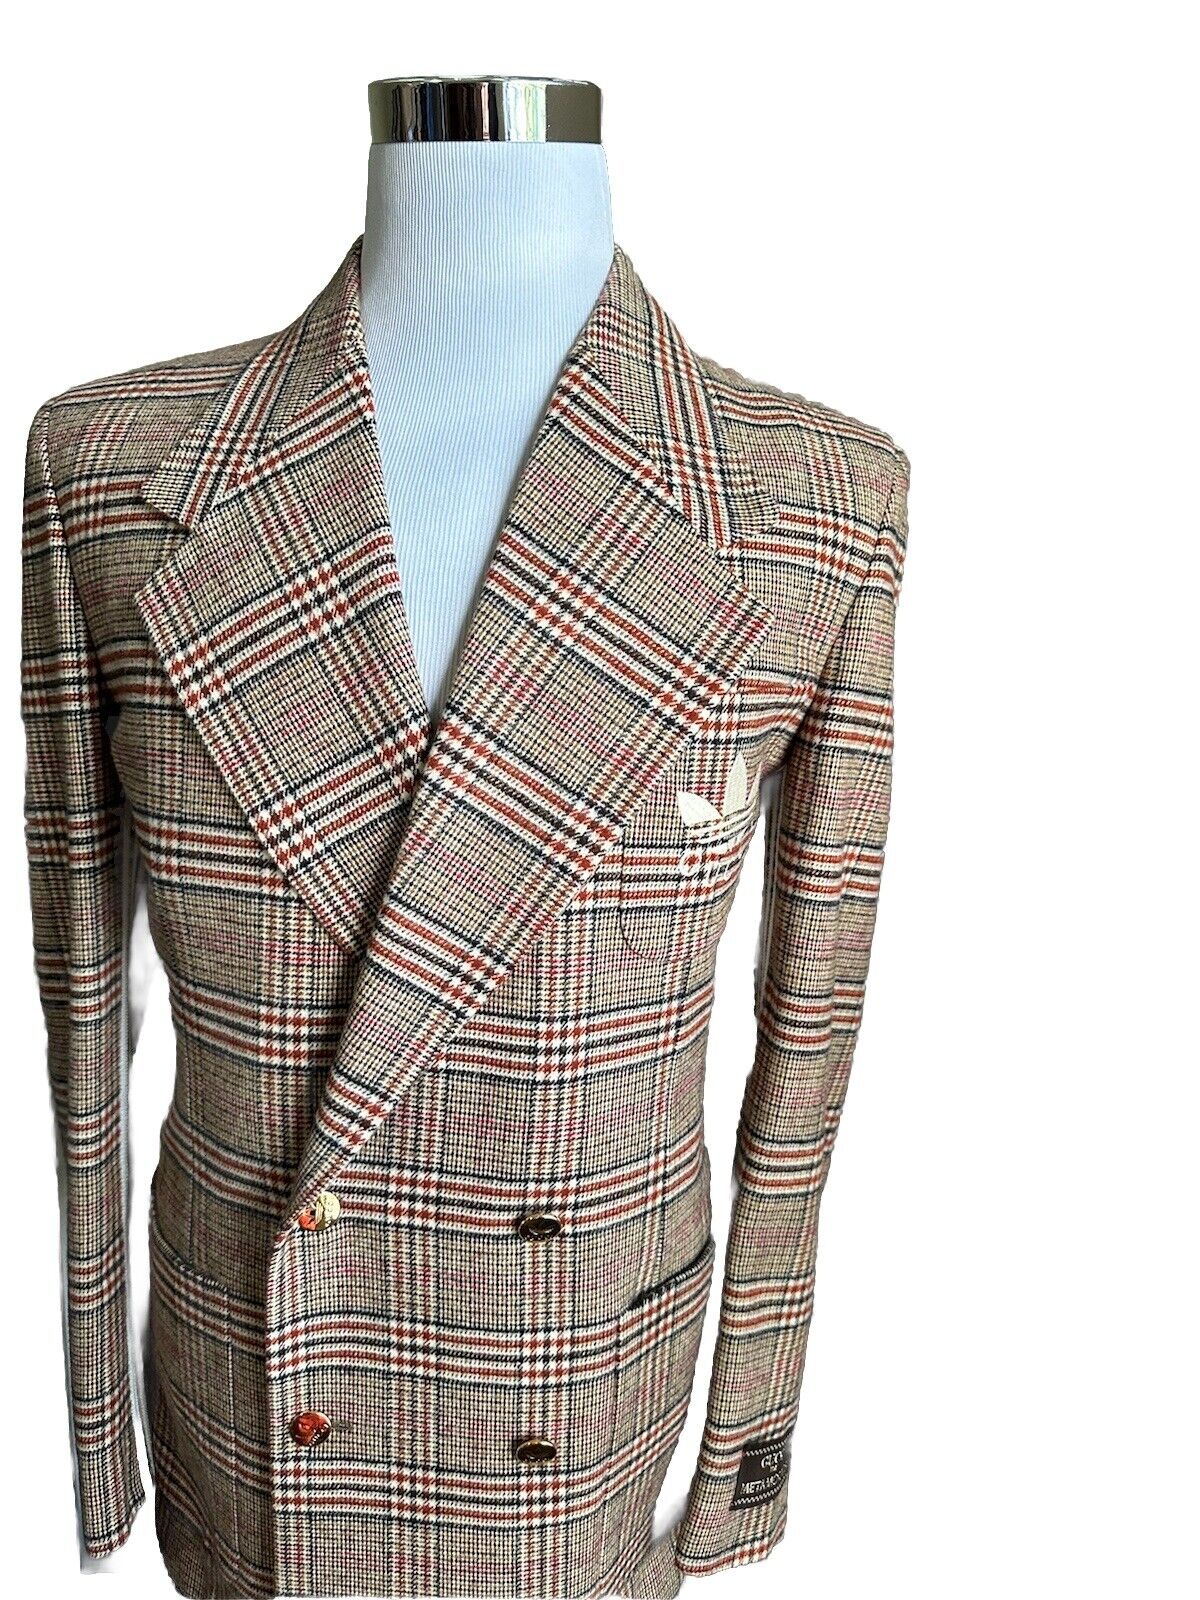 Gucci adidas Men Check On Flannel Suit Beige/Brown 40R US/50R Eu New $5800